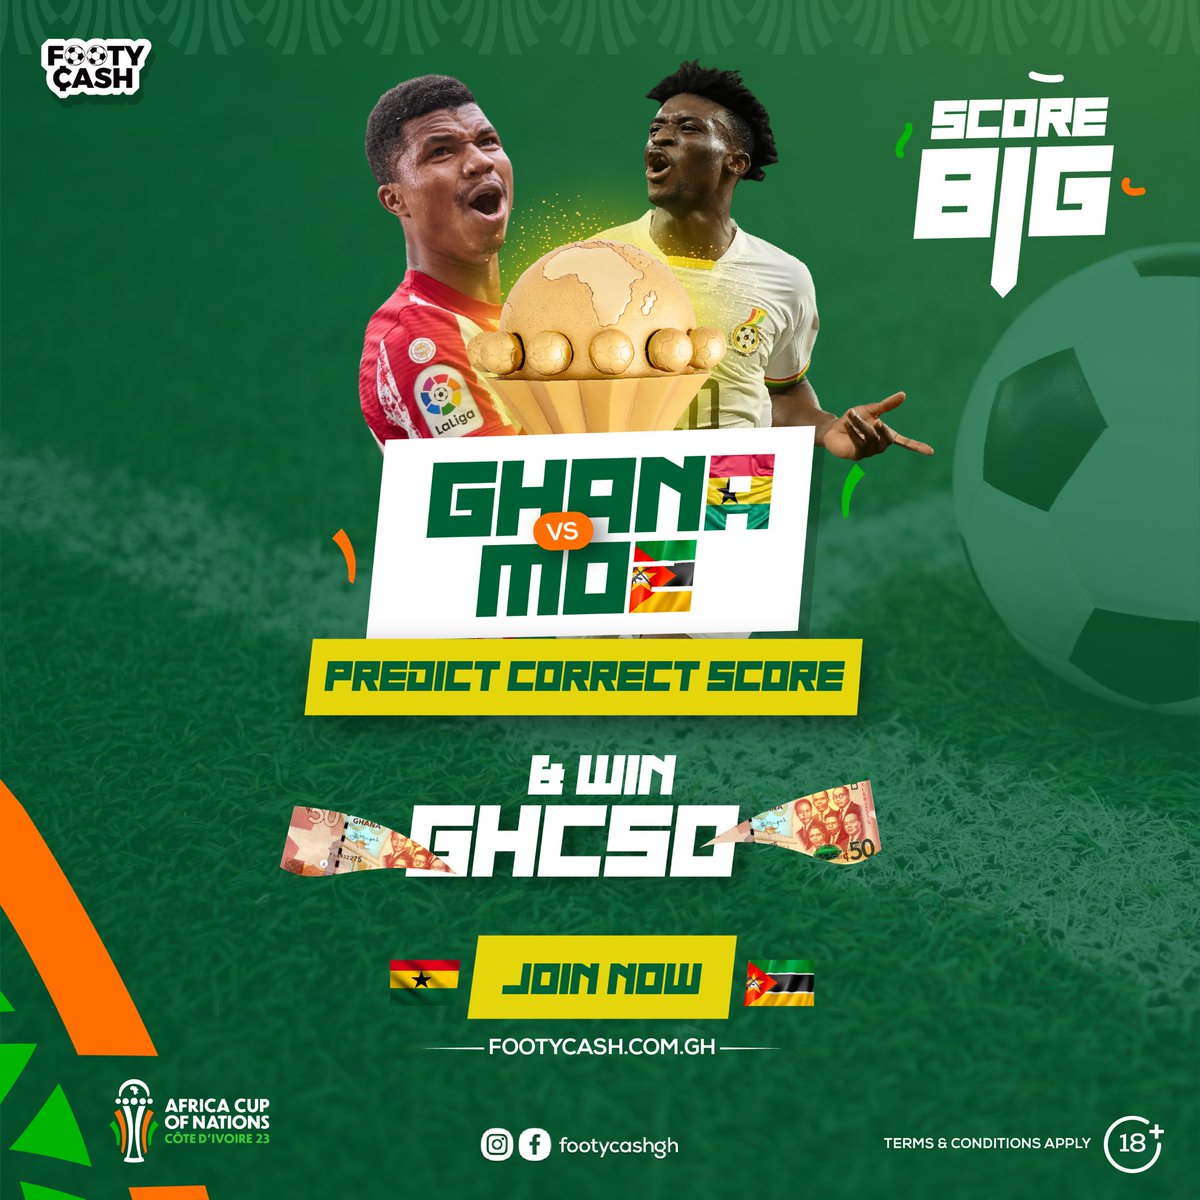 Predict the correct score for the Ghana vs Mozambique game and stand a chance to win GHS50! The thrill is on, the stakes are high – let the game begin!

#AFCONCountdown #PredictToWin #TotalEnergiesAFCON2023 #BlackStars #AFCON2023 #footycash #football #sports